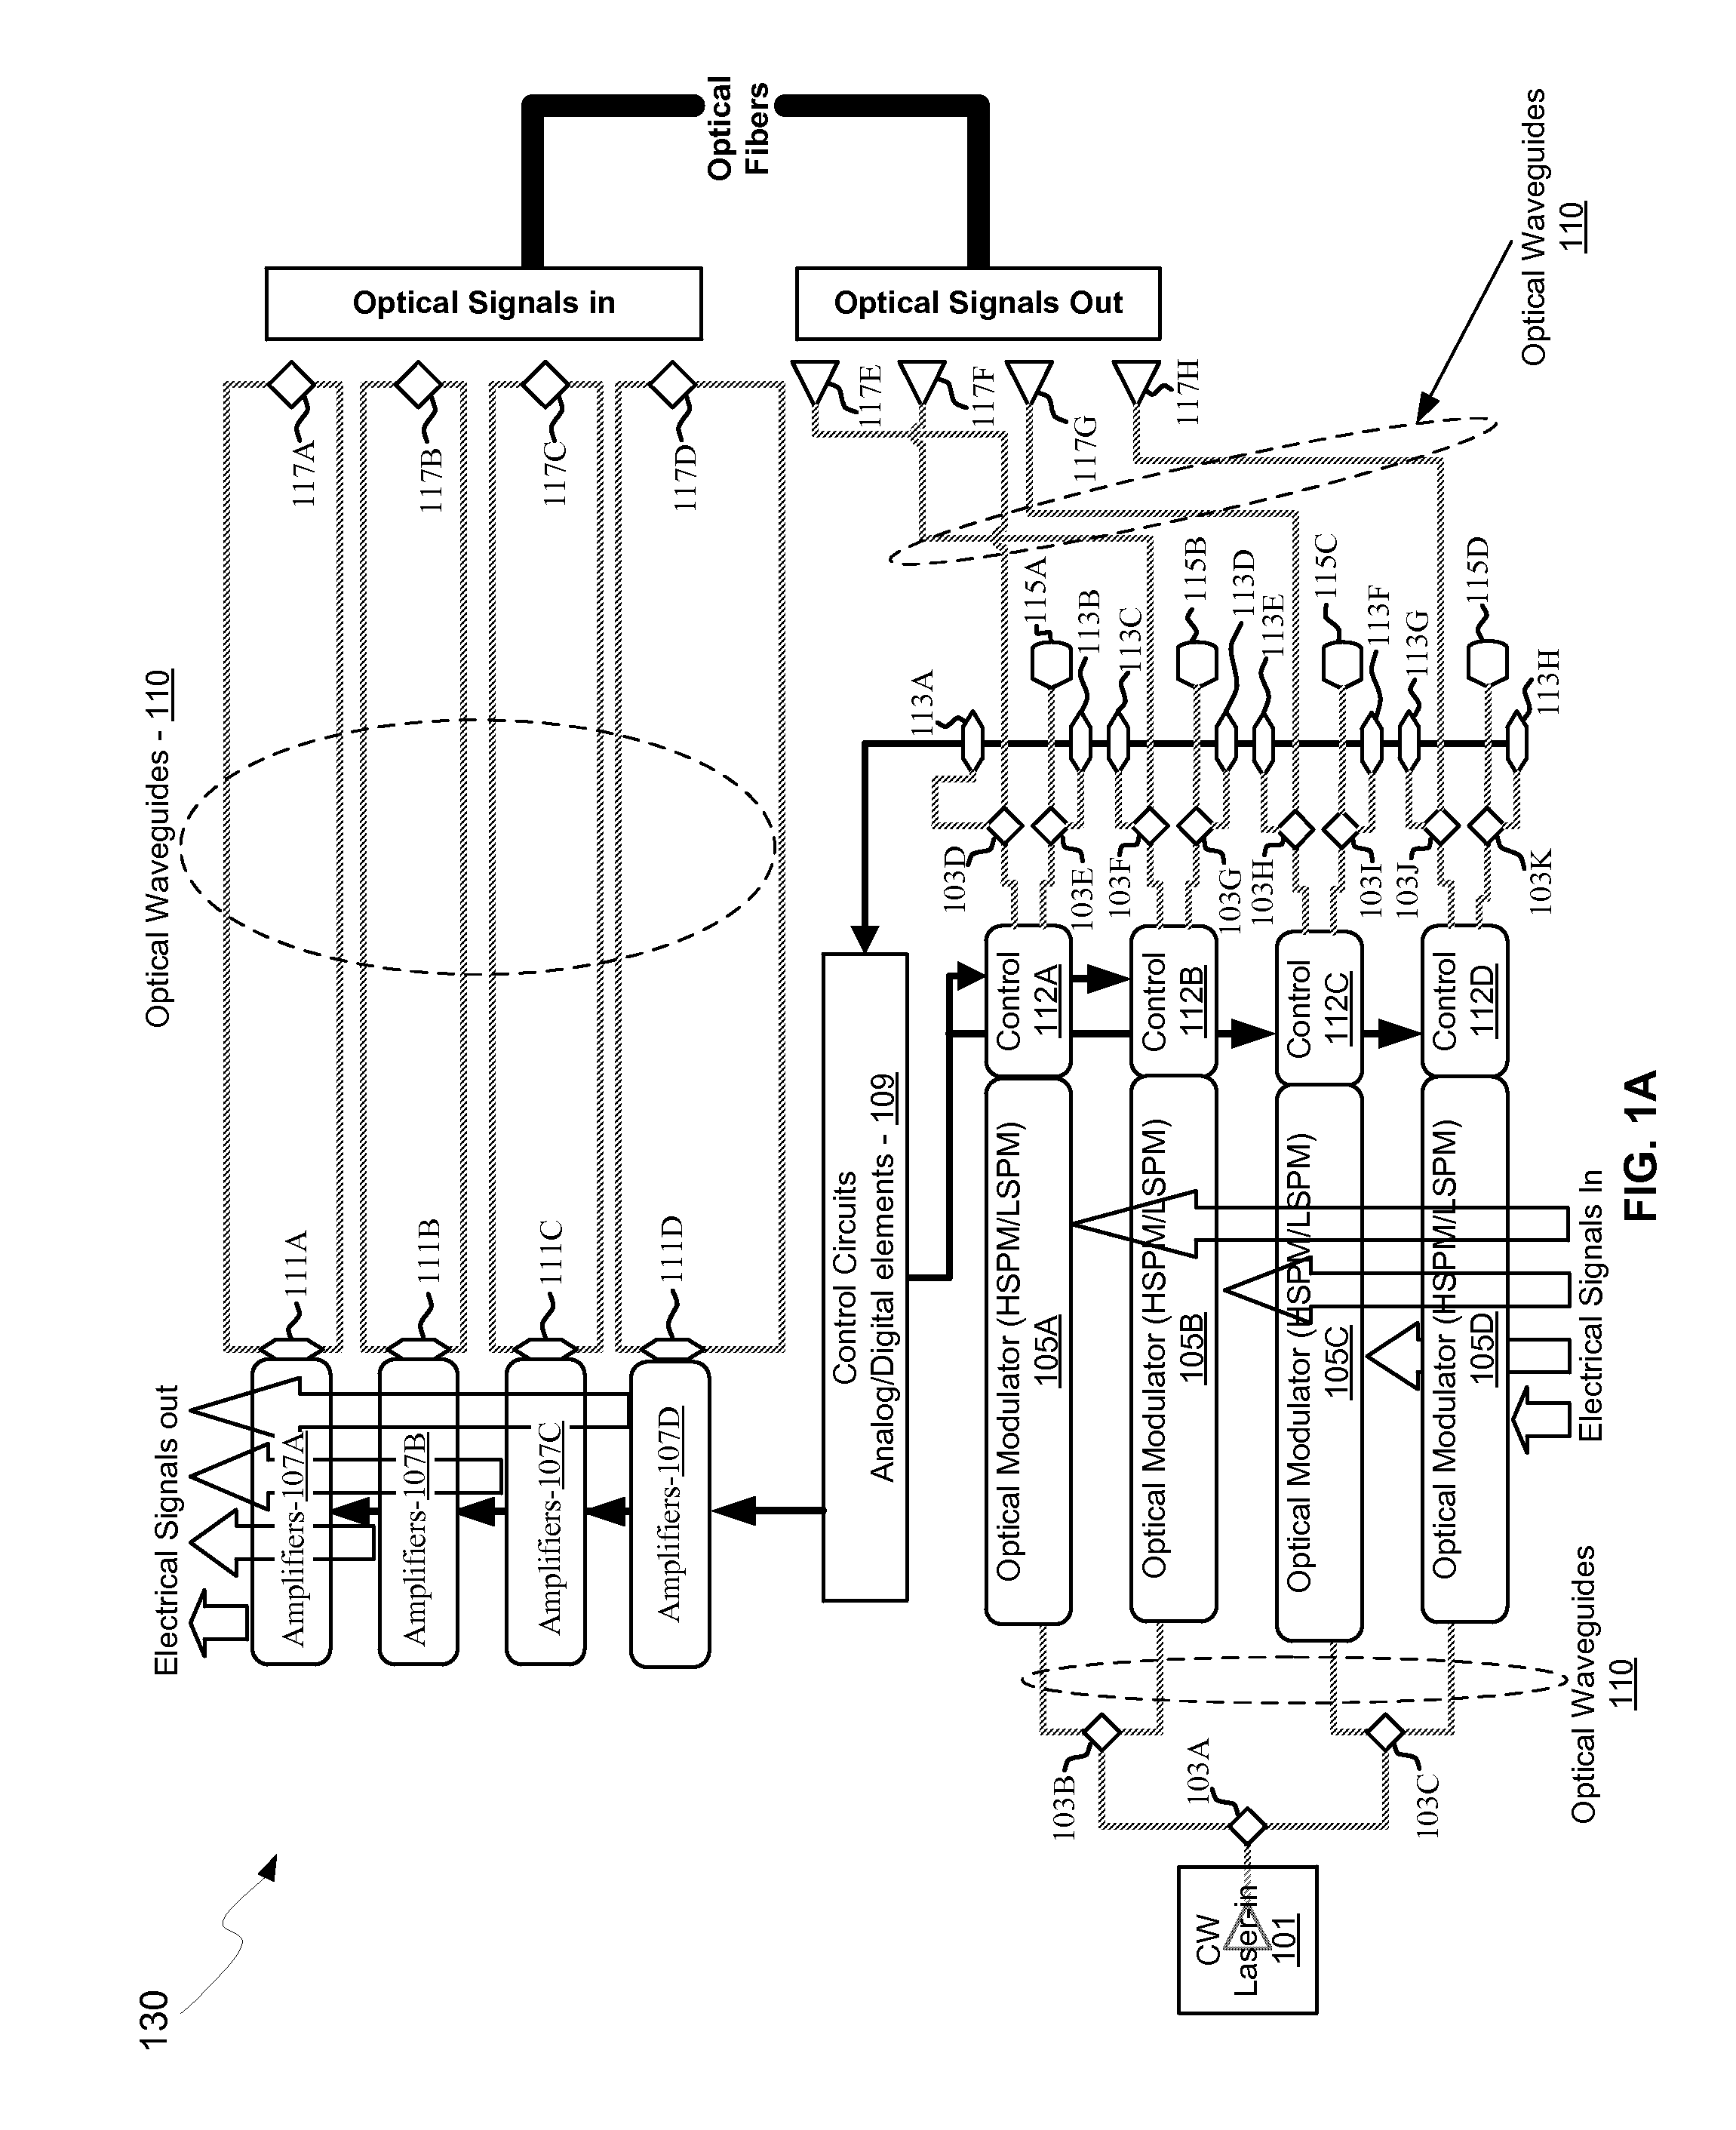 Method And System For A Silicon-Based Optical Phase Modulator With High Modal Overlap